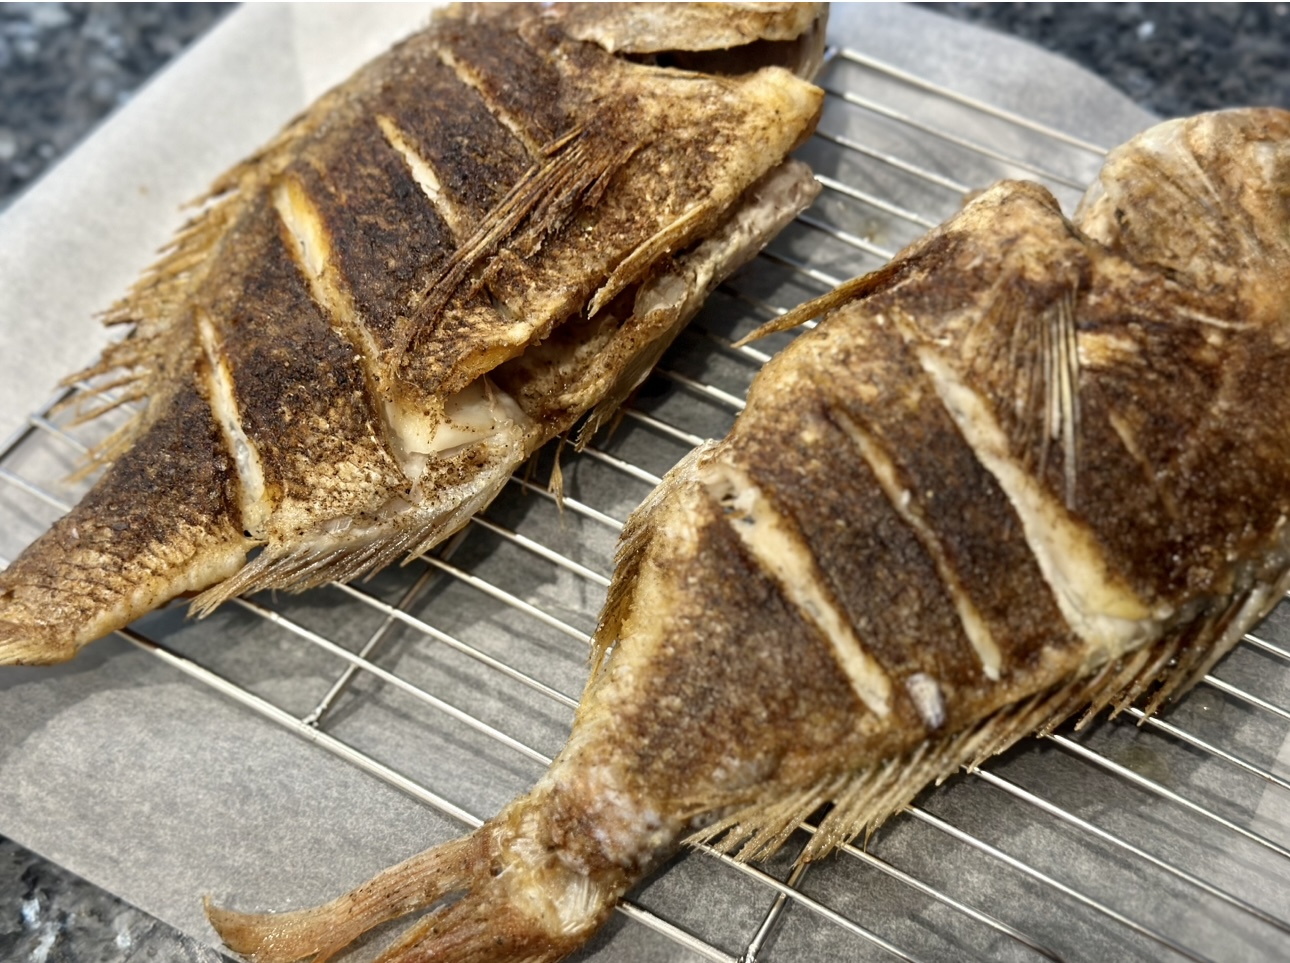 Chinese Salt and Pepper Fish - How to Make Chinese Fish